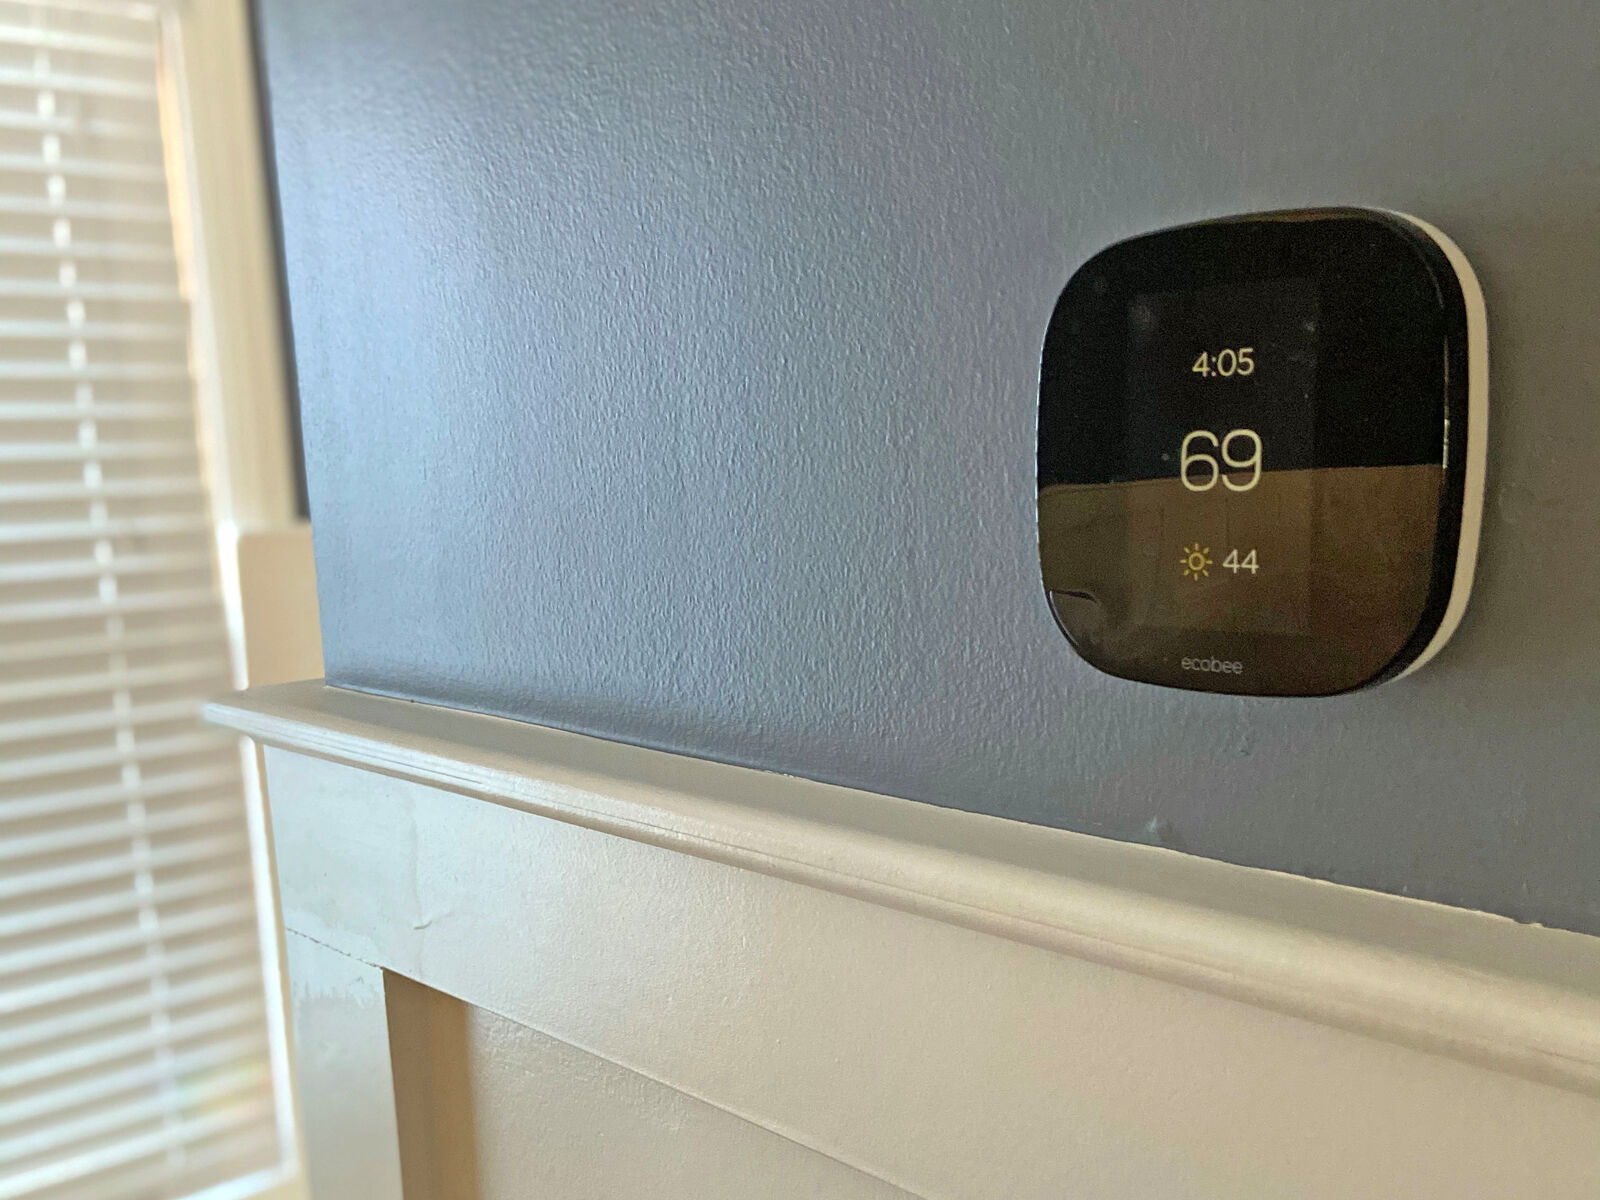 EcoBee thermostat on modern wall